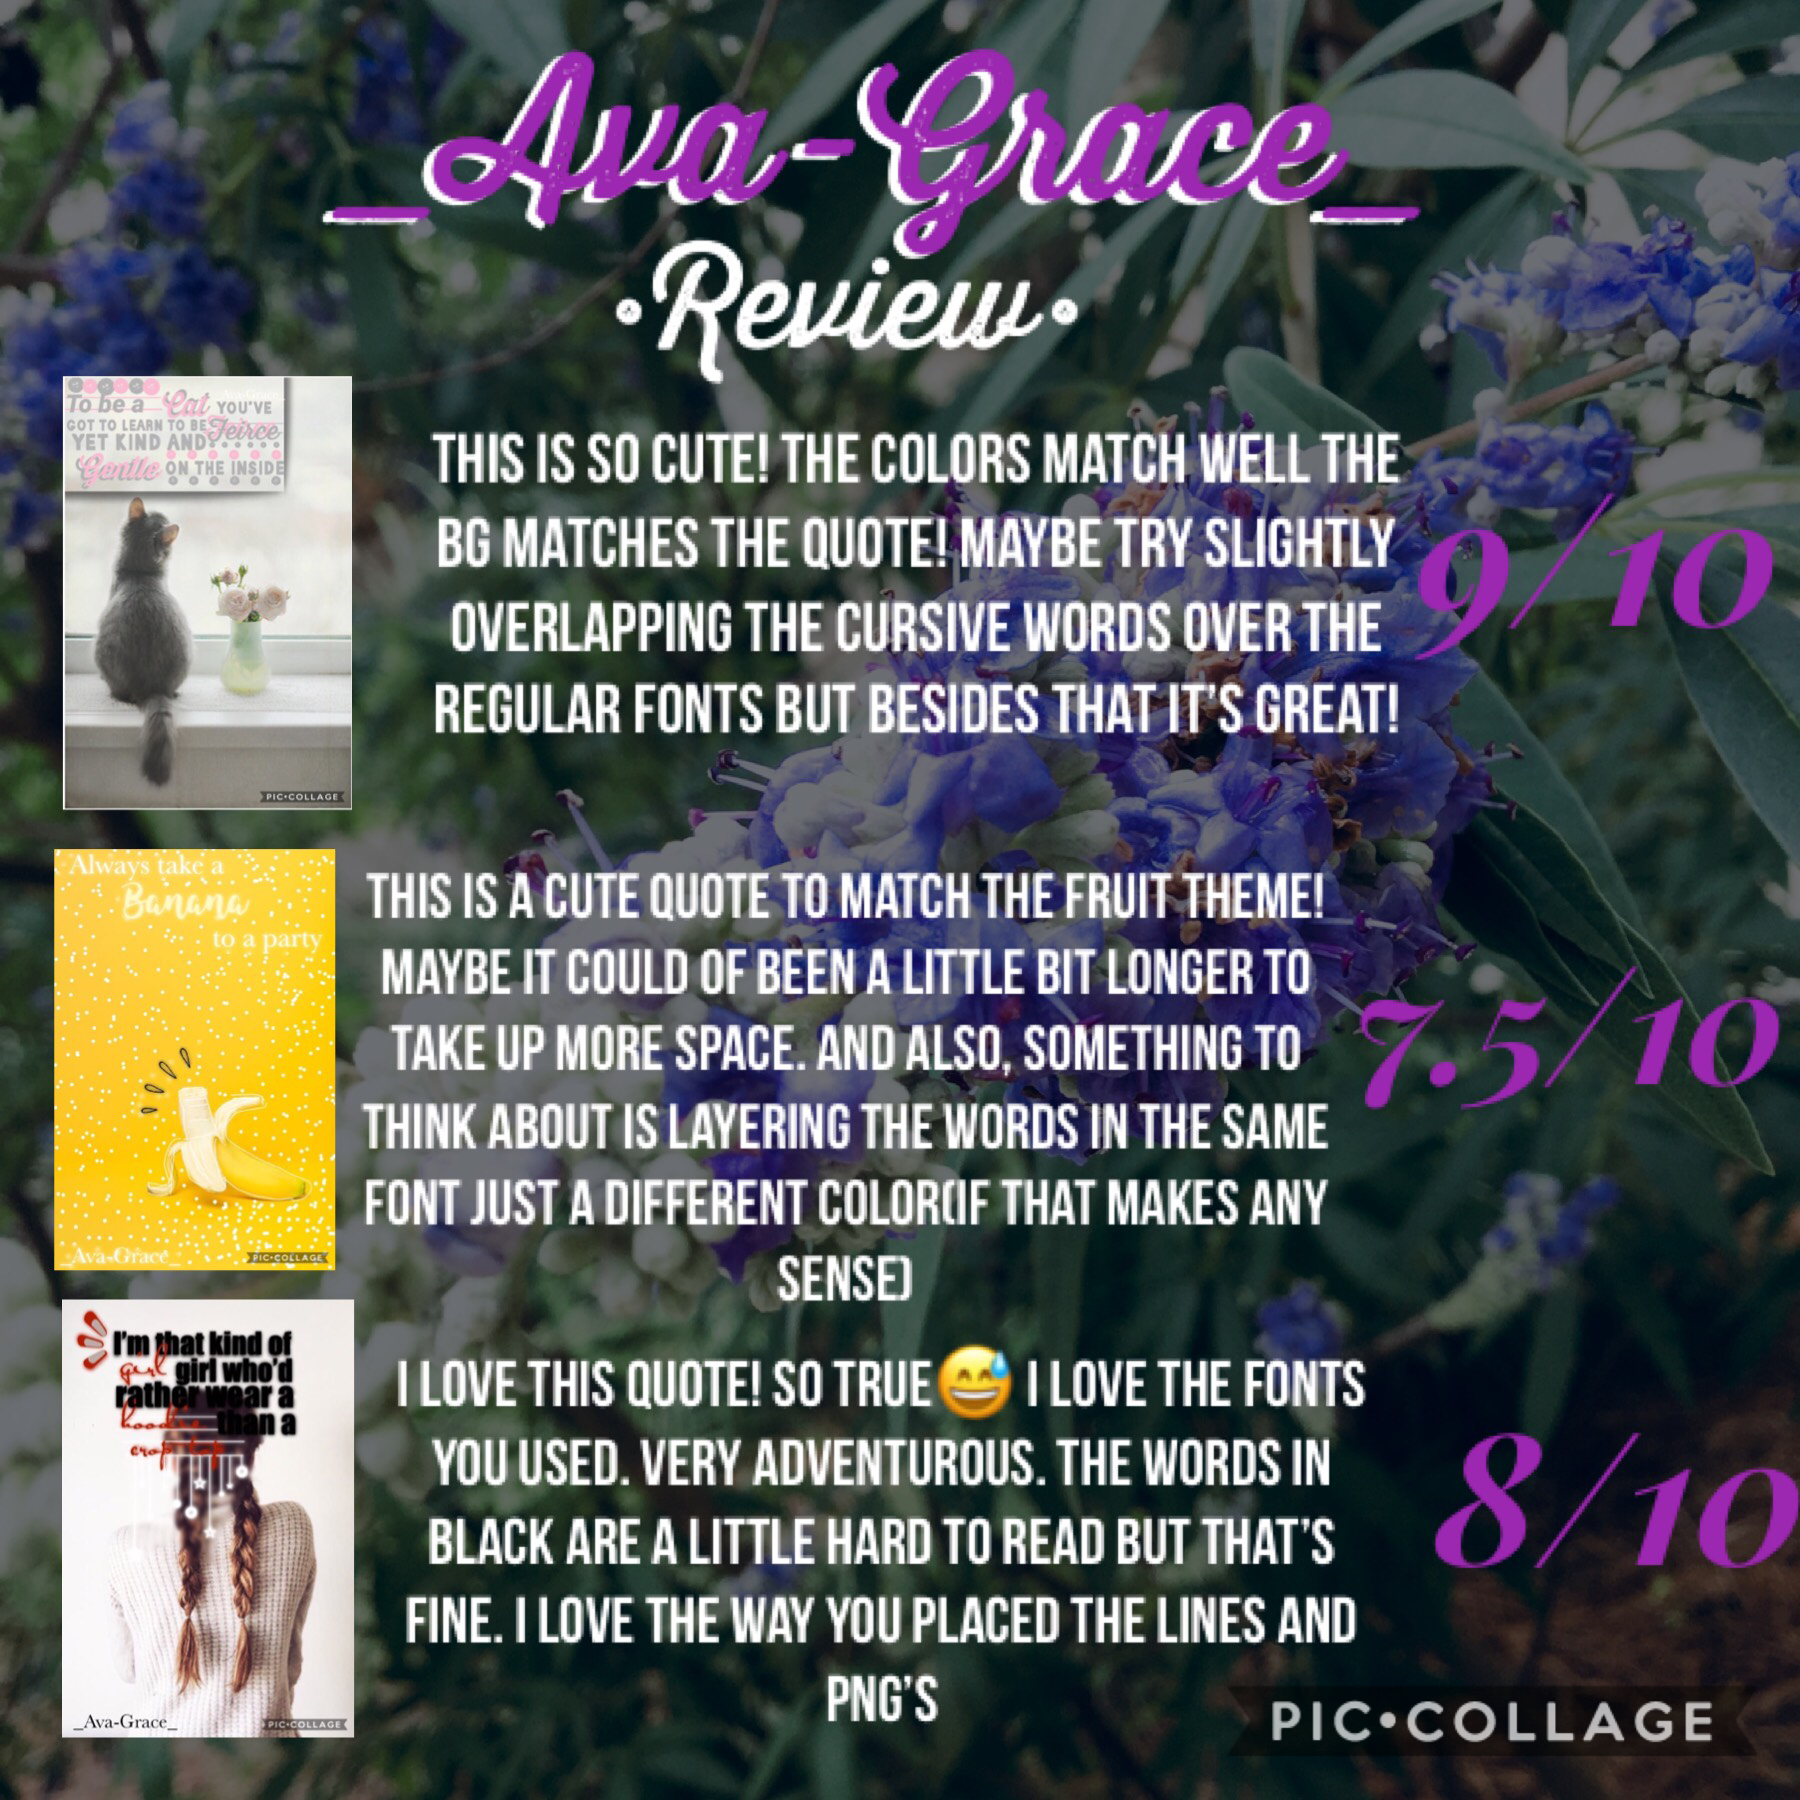 Tap🦄
IT’S A UNICORN!!!!! Anyways @_Ava-Grace_ you did very well!!   @coolcat4052 you are next on my list for reviews! Anyways QOTD: should I continue doing reviews? AOTD: that’s why I’m asking you😅